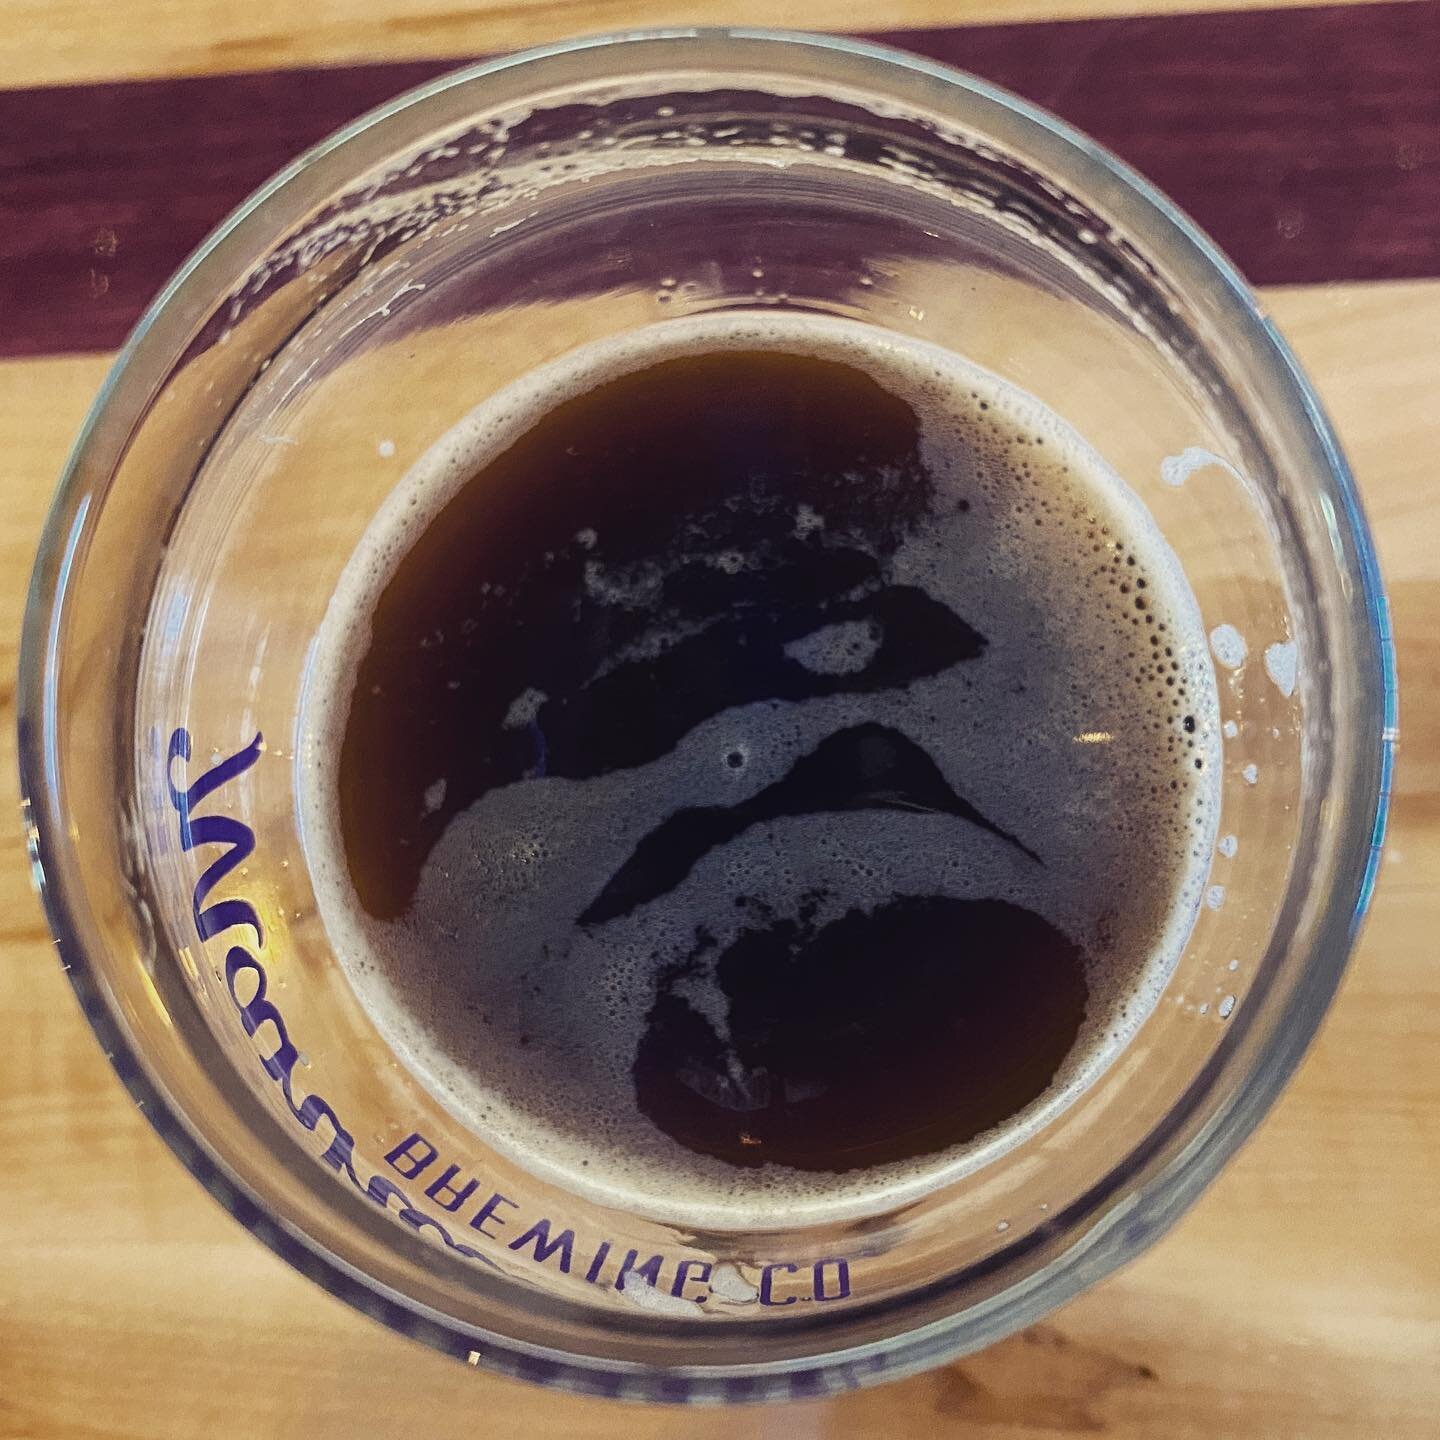 Me thinks my @manhattanbrewing Ninja Pirate black NEIPA is looking grumpy 🏴&zwj;☠️😠 What do you see?? #beerrorschach
.
.
Parksnpints.com
.
.
#KSbeer #drinklocal #blackIPA #findyourpint #enjoywildly #parksnpints